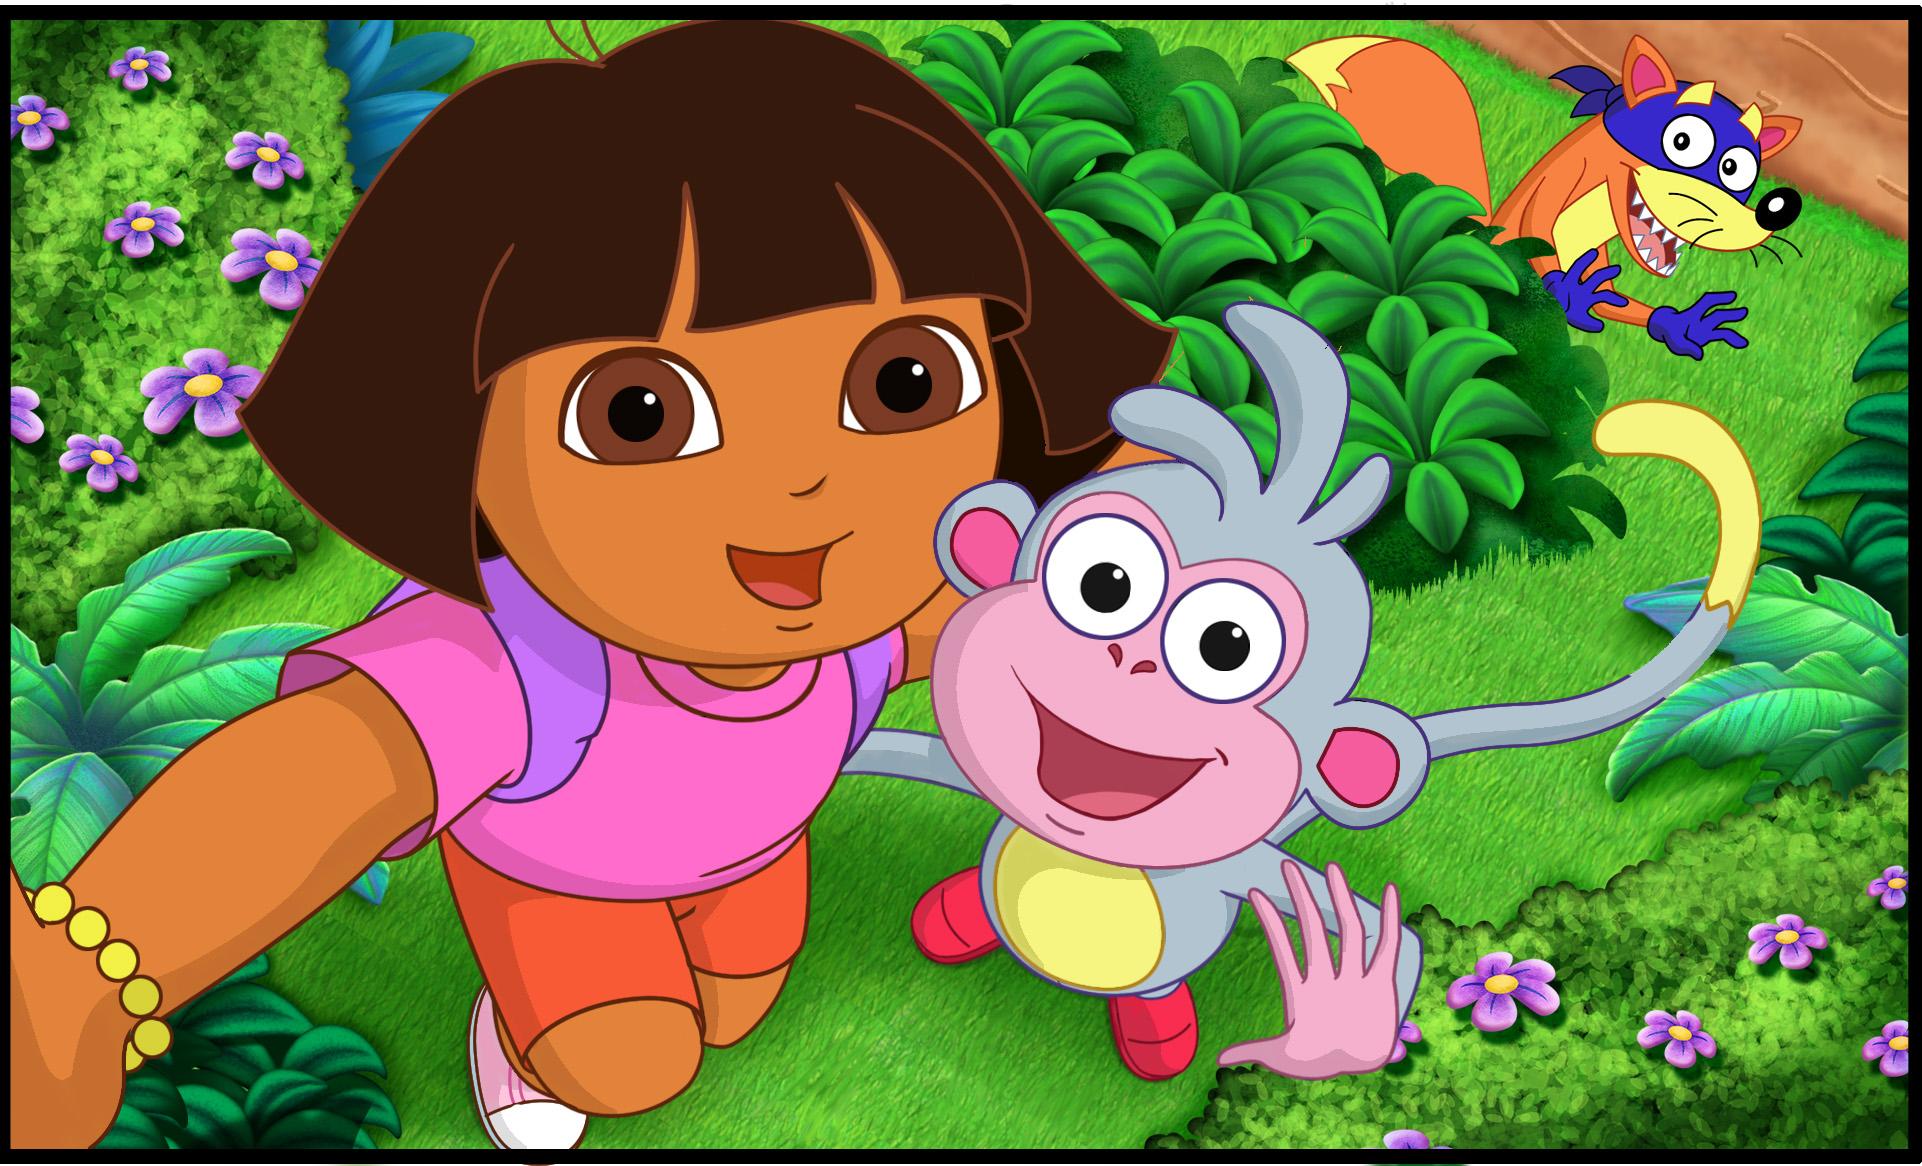 Join Dora, Boots, and Swiper and share your own @Macys #AmericanSelfie.” 